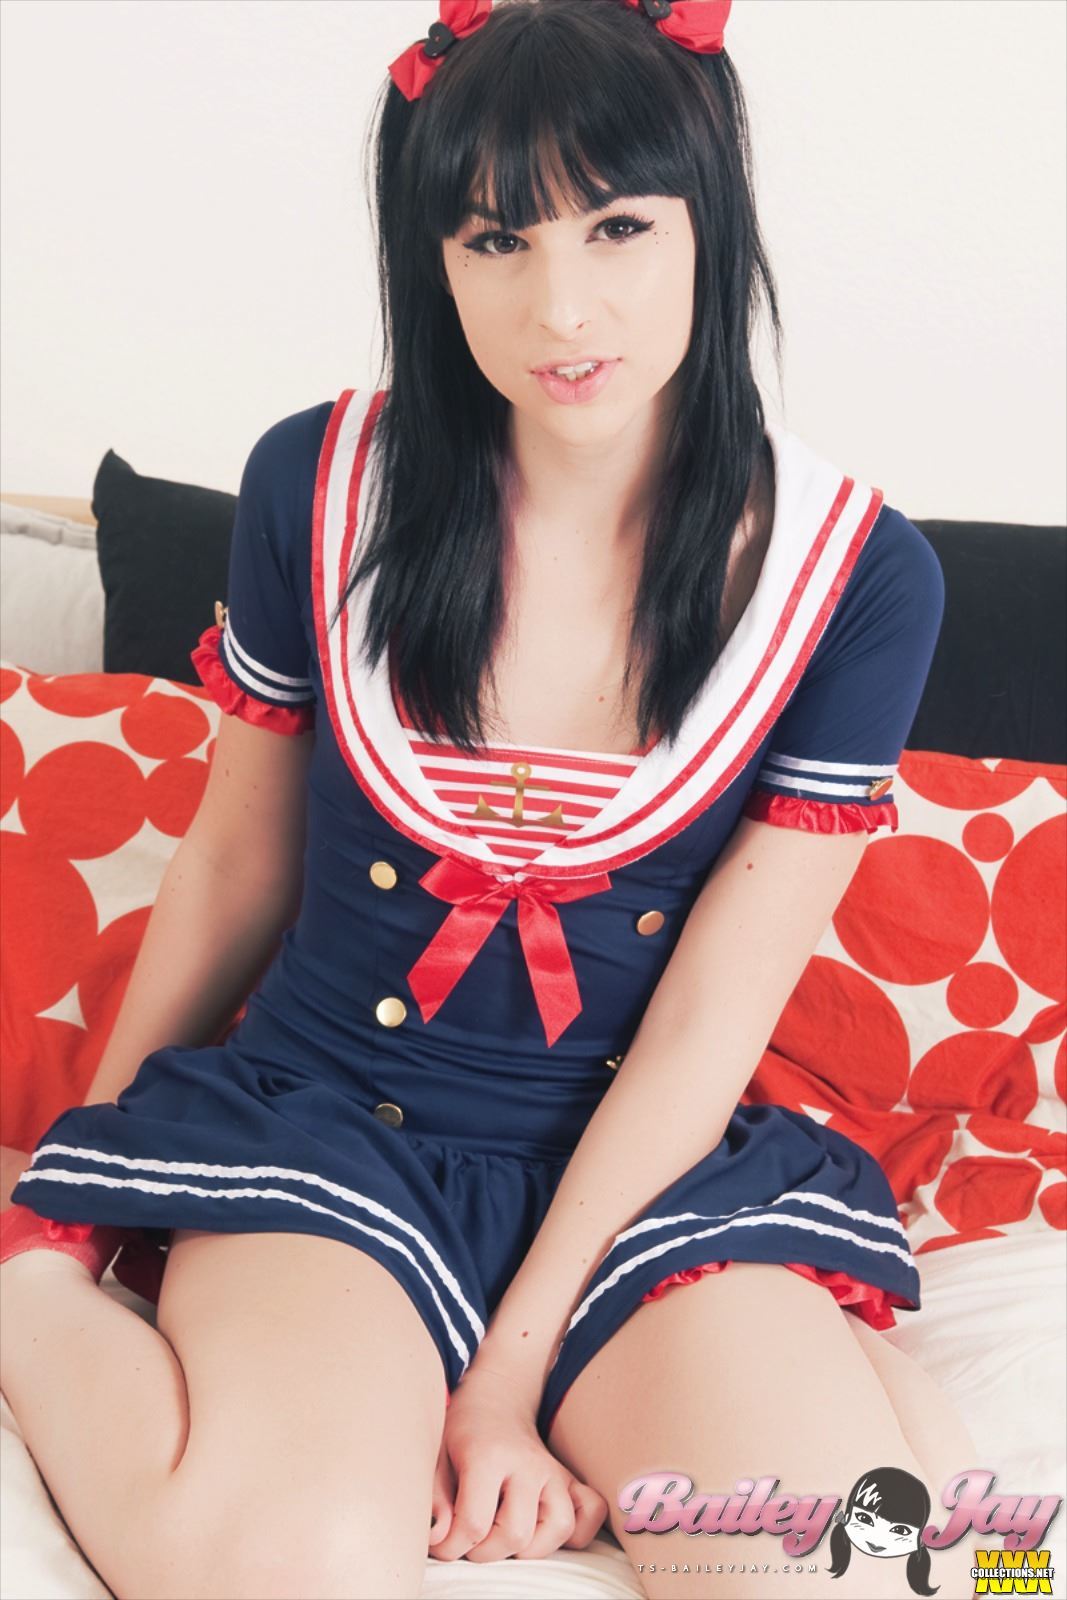 bailey_jay black_hair bow clothed cute long_hair looking_at_viewer non-nude on_knees parted_lips porn_star sailor_uniform shemale solo transgender watermark